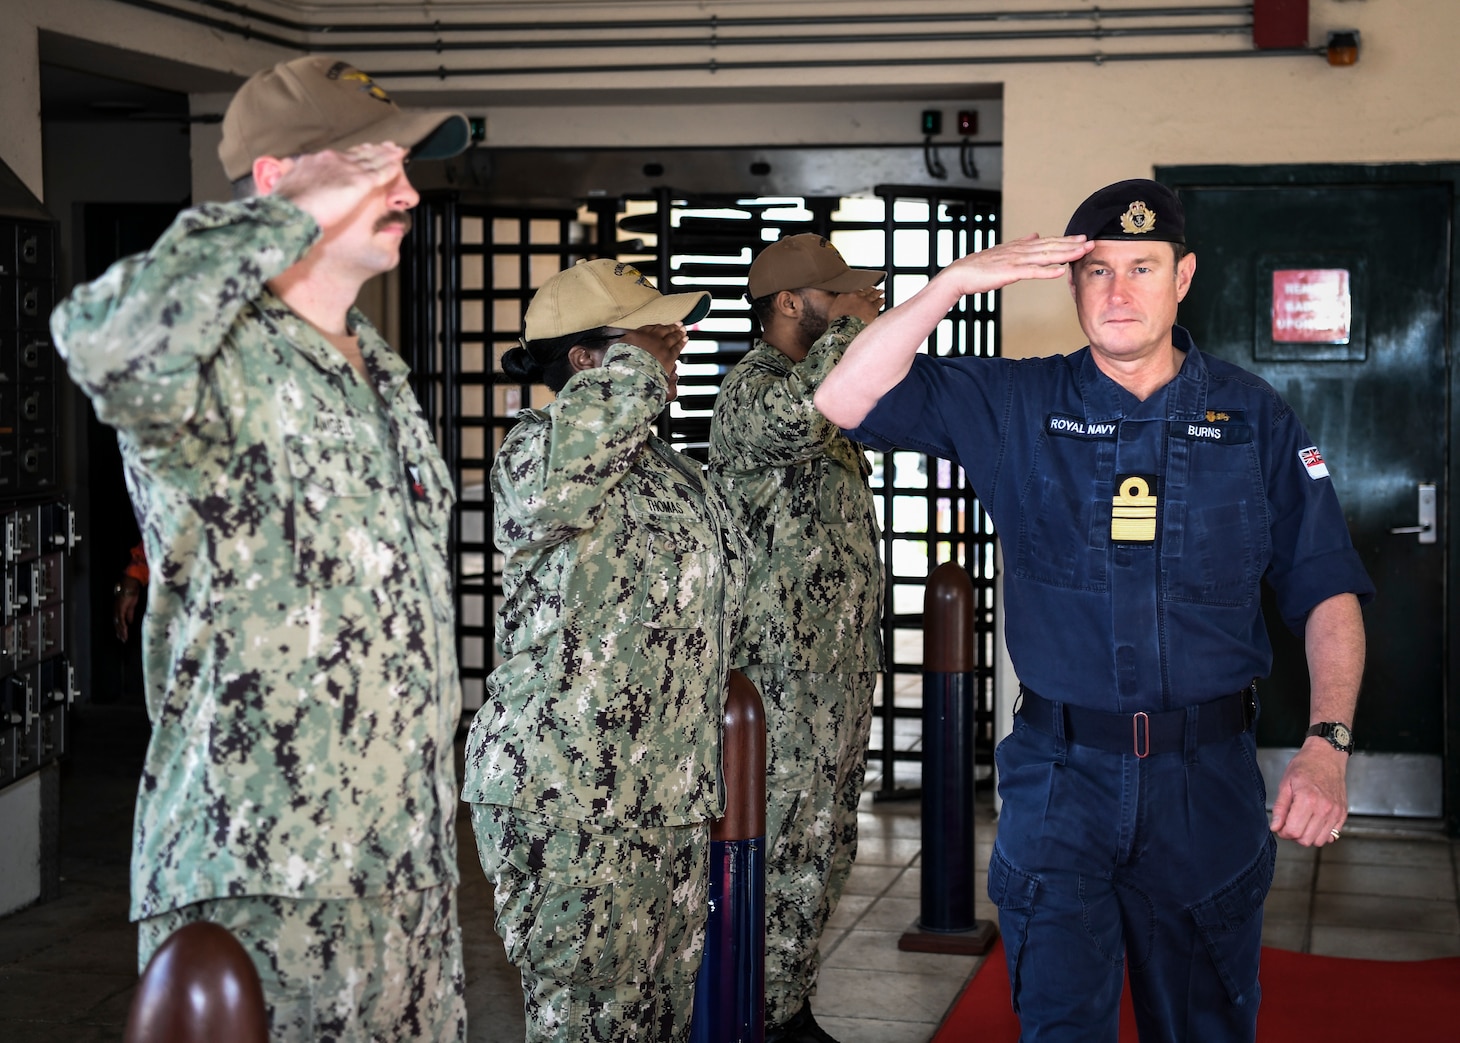 Royal Navy Vice Adm. Andrew Burns OBE, fleet commander of the Royal Navy, meets with Vice Adm. Thomas Ishee, not pictured, commander of U.S. 6th Fleet, in front of the U.S. Naval Forces Europe-Africa (NAVEUR-NAVAF) and U.S. 6th Fleet headquarters on Naval Support Activity Naples, Italy, Oct. 4, 2023. NAVEUR-NAVAF operates U.S. naval forces in the U.S. European Command (USEUCOM) and U.S. Africa Command (USAFRICOM) areas of responsibility. U.S. 6th Fleet is permanently assigned to NAVEUR-NAVAF, and employs maritime forces through the full spectrum of joint and naval operations. (U.S. Navy photo by Mass Communication Specialist 1st Class Cameron C. Edy)